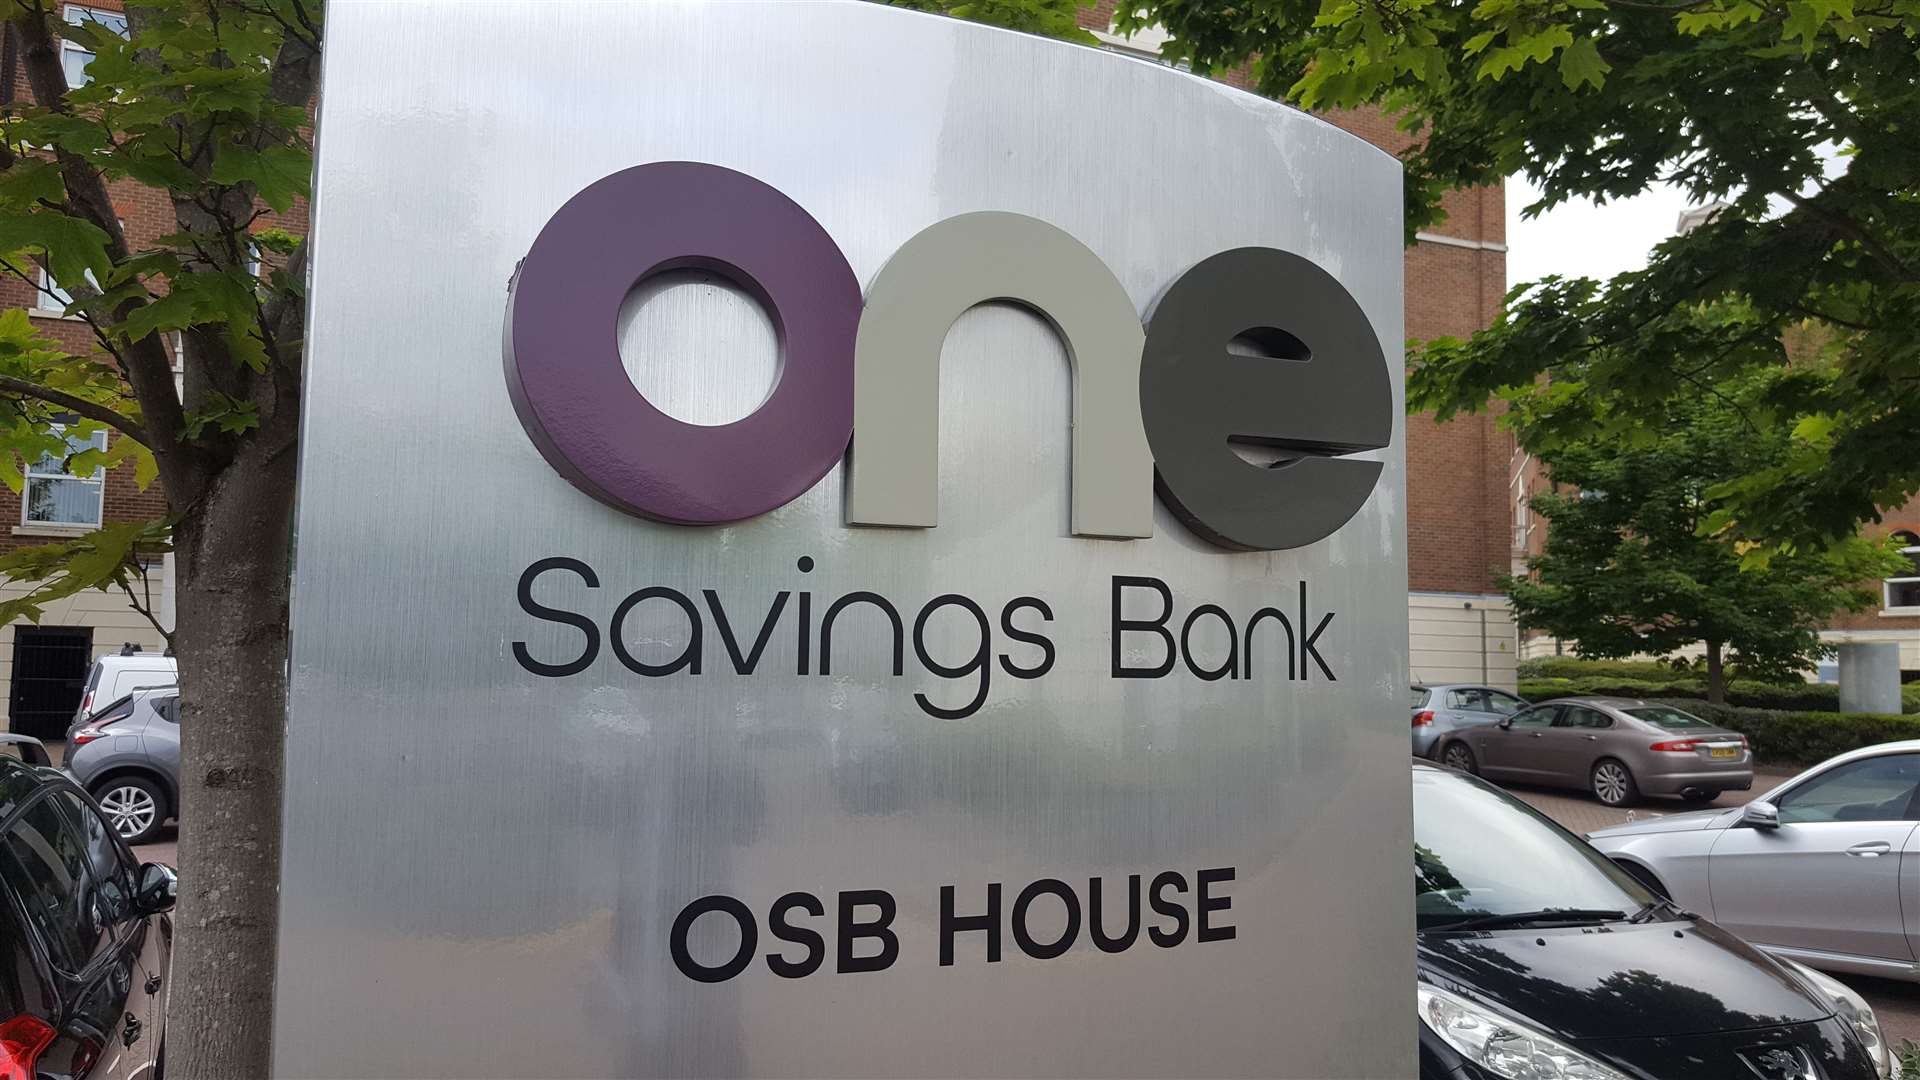 OneSavings Bank's headquarters in Chatham Maritime